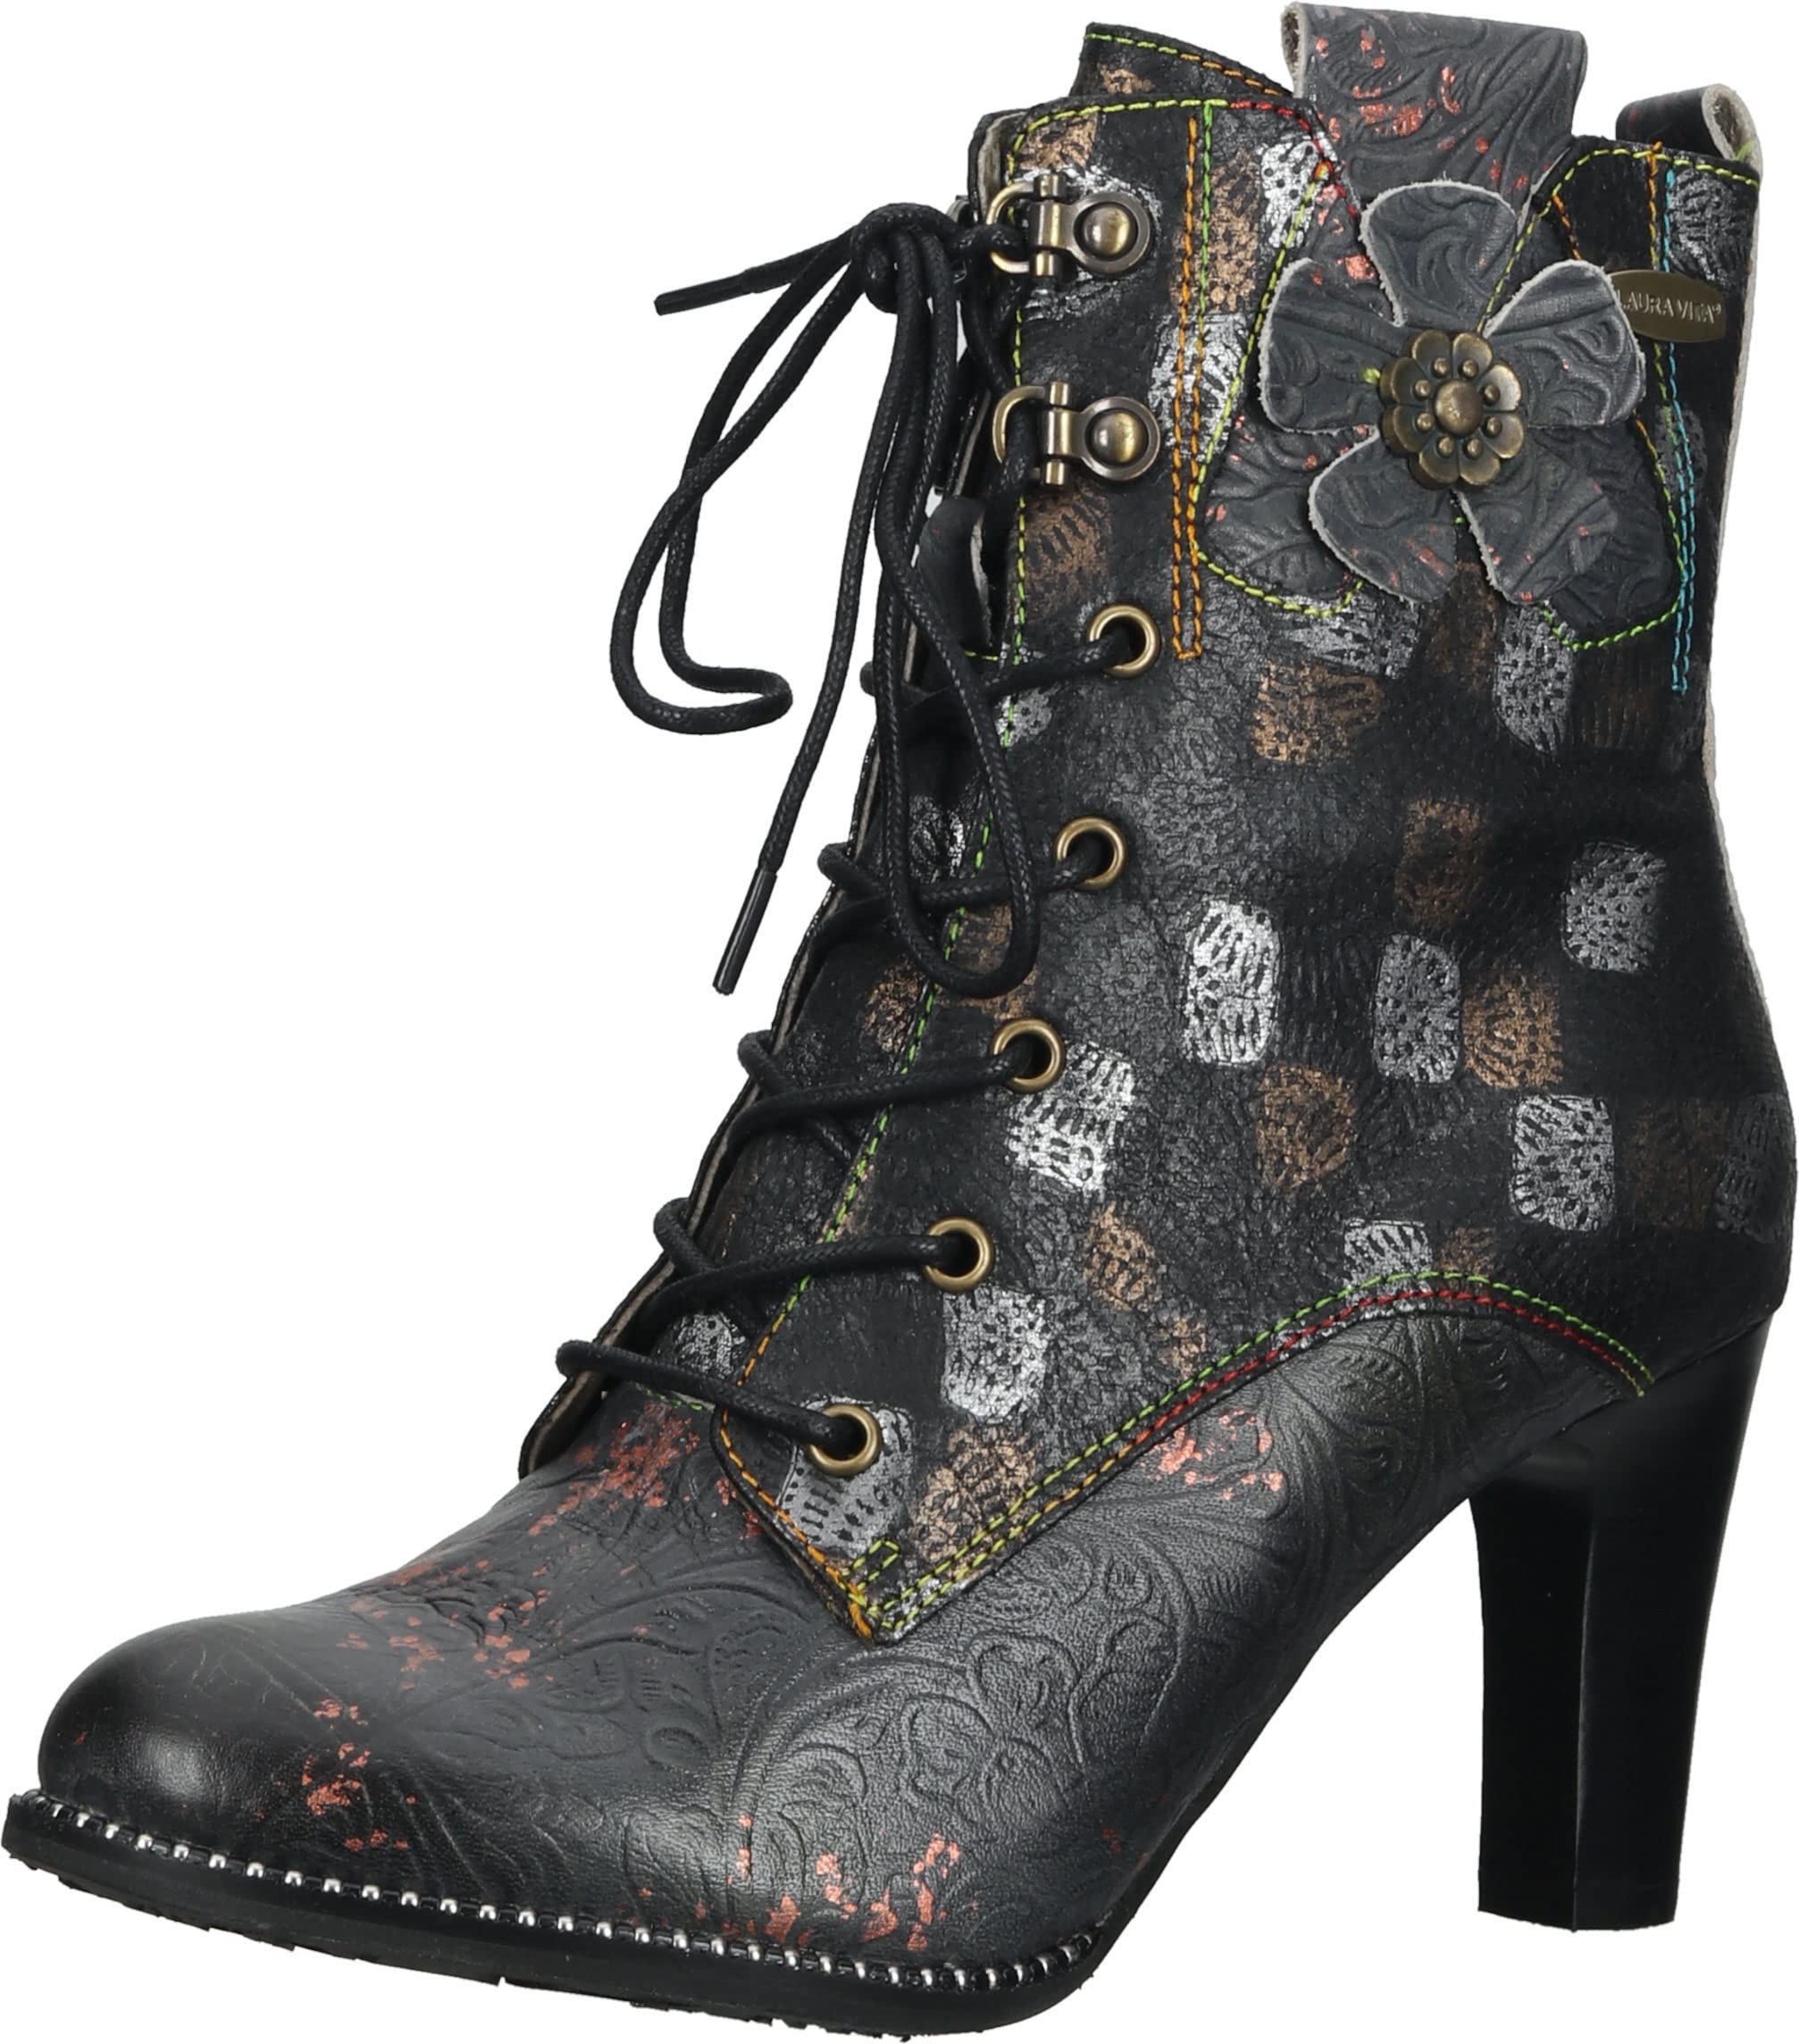 Populaire LAURA VITA Alcbaneo 141 Ankle Boot Femme FY2Q